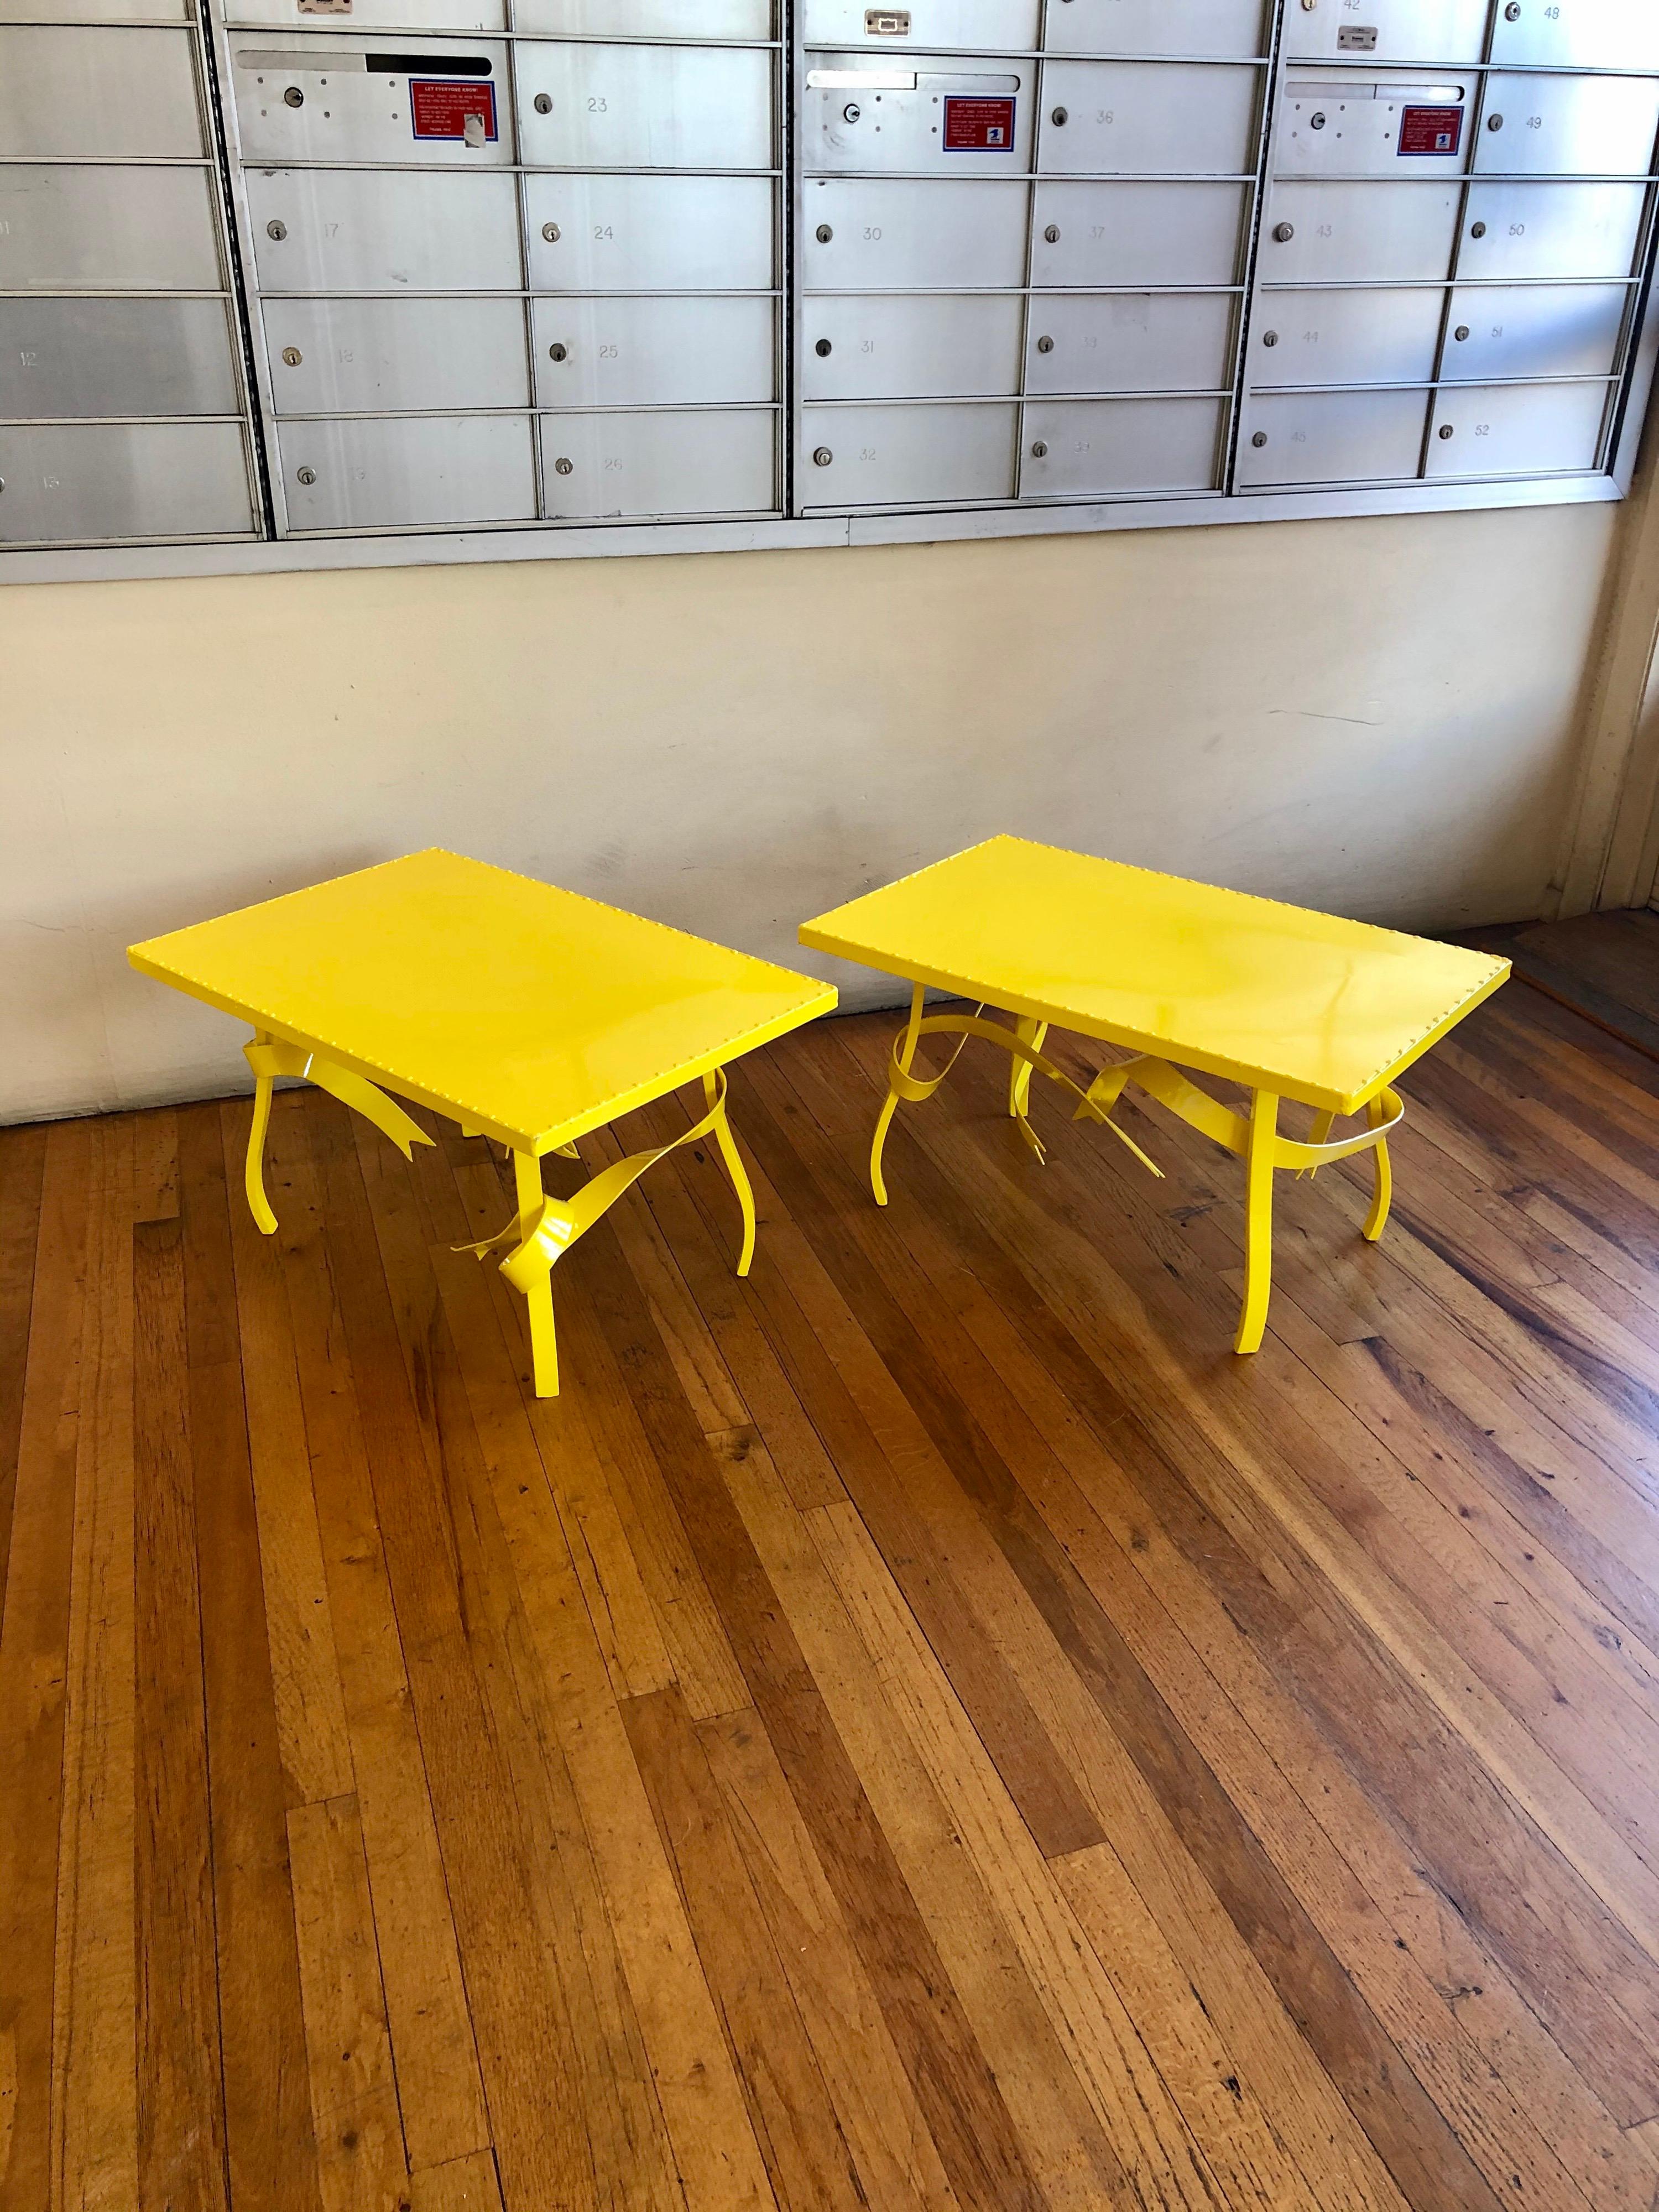 Great and rare custom made end tables circa 1980s made in San Diego California, we have freshly sandblasted and powder coated them in yellow, these pair of tables can be used indoors or outdoors.